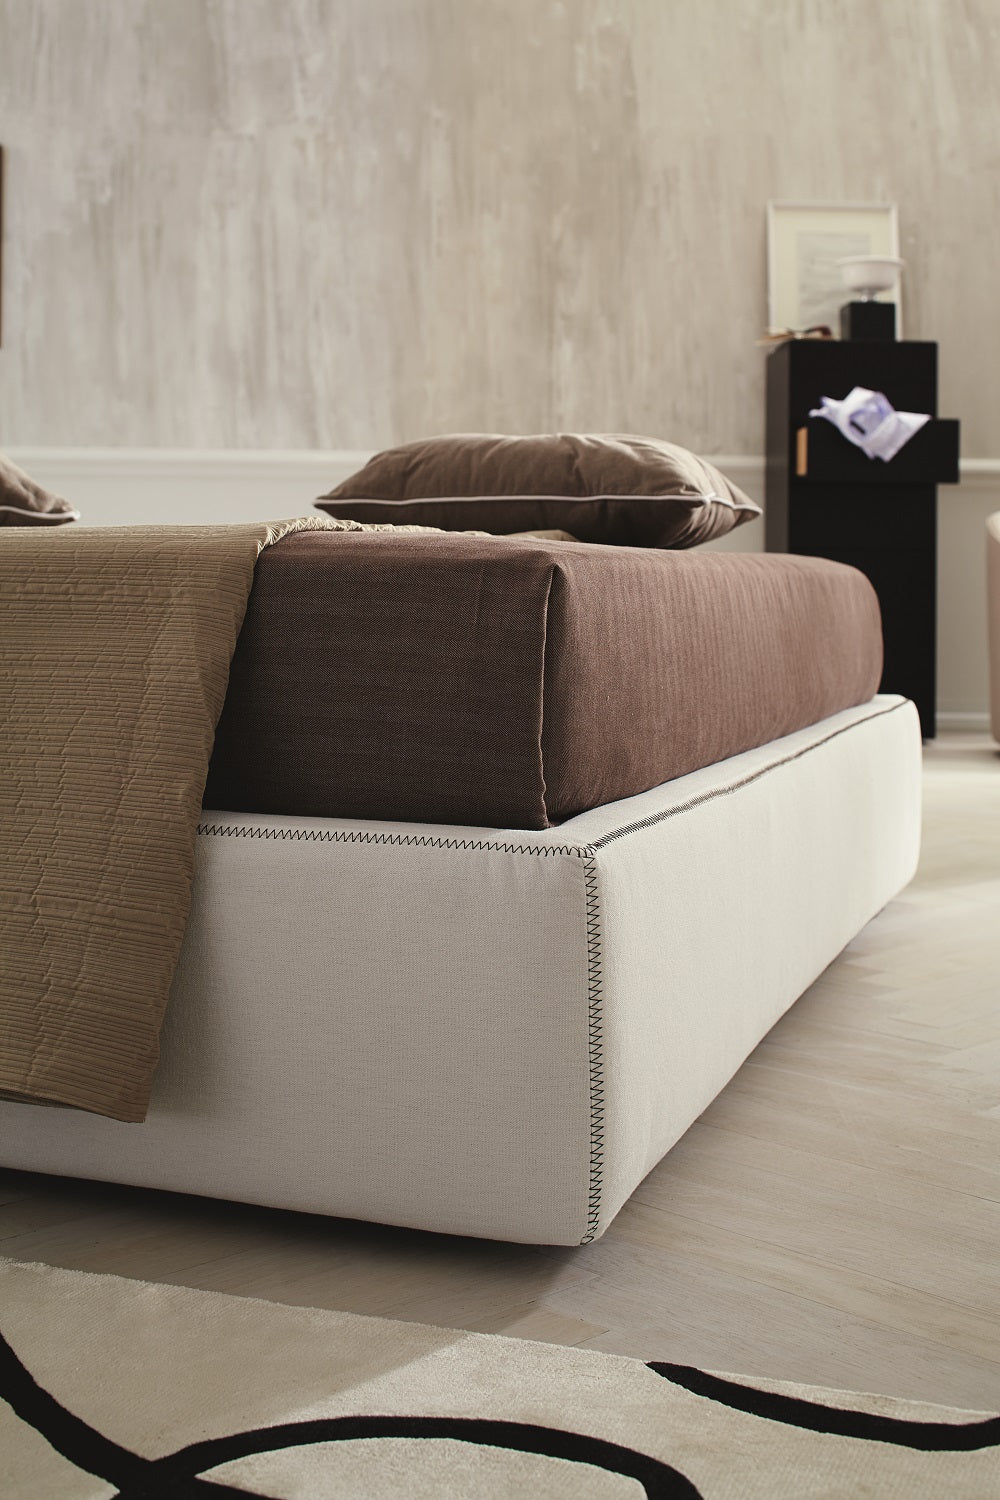 Clay King Storage Bed by JM